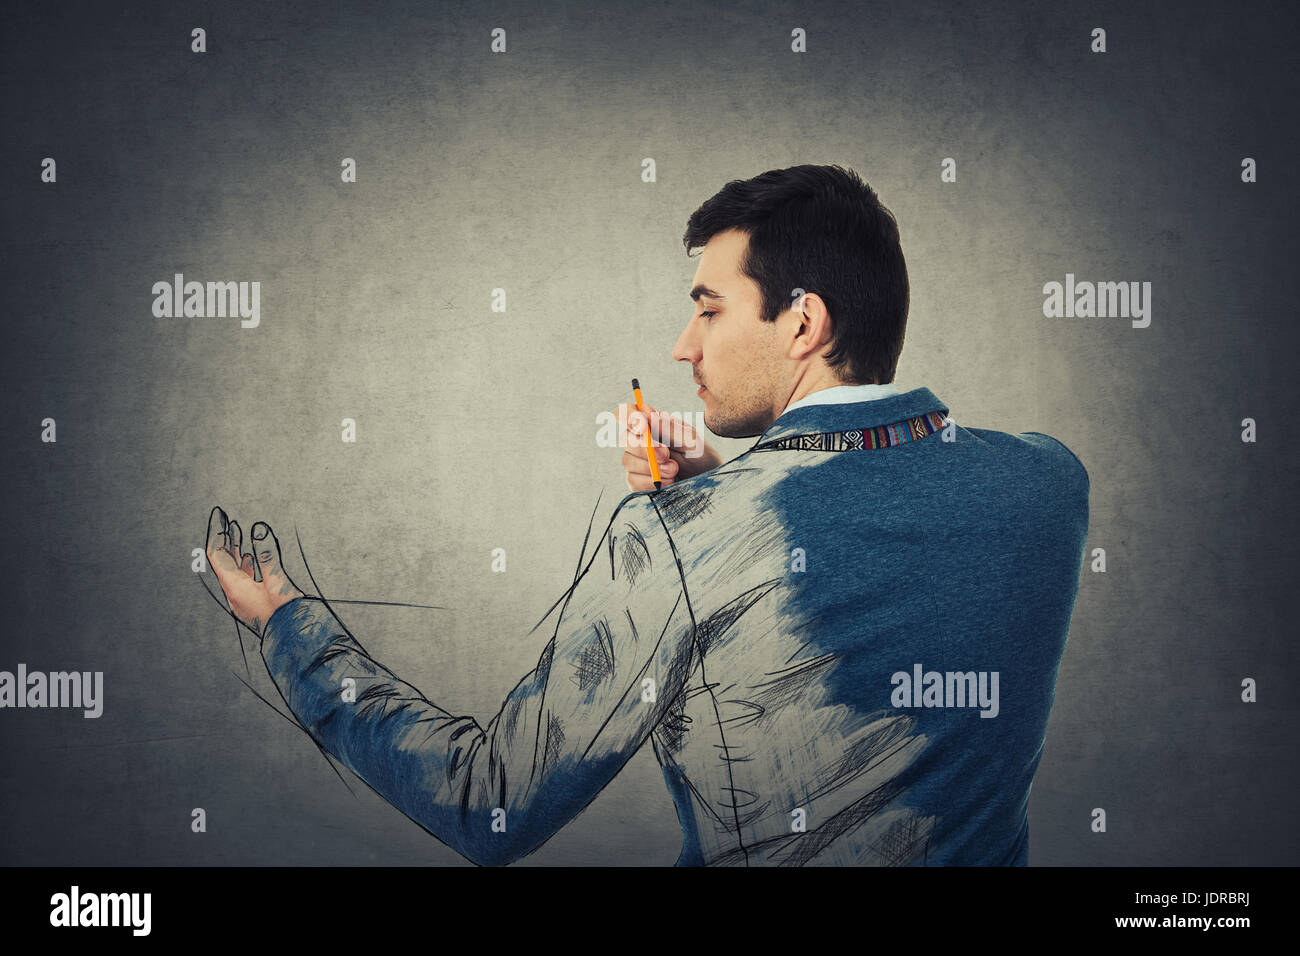 Businessman Personal development concept. Man create himself drawing a sketch of his body on grey wall background. Stock Photo